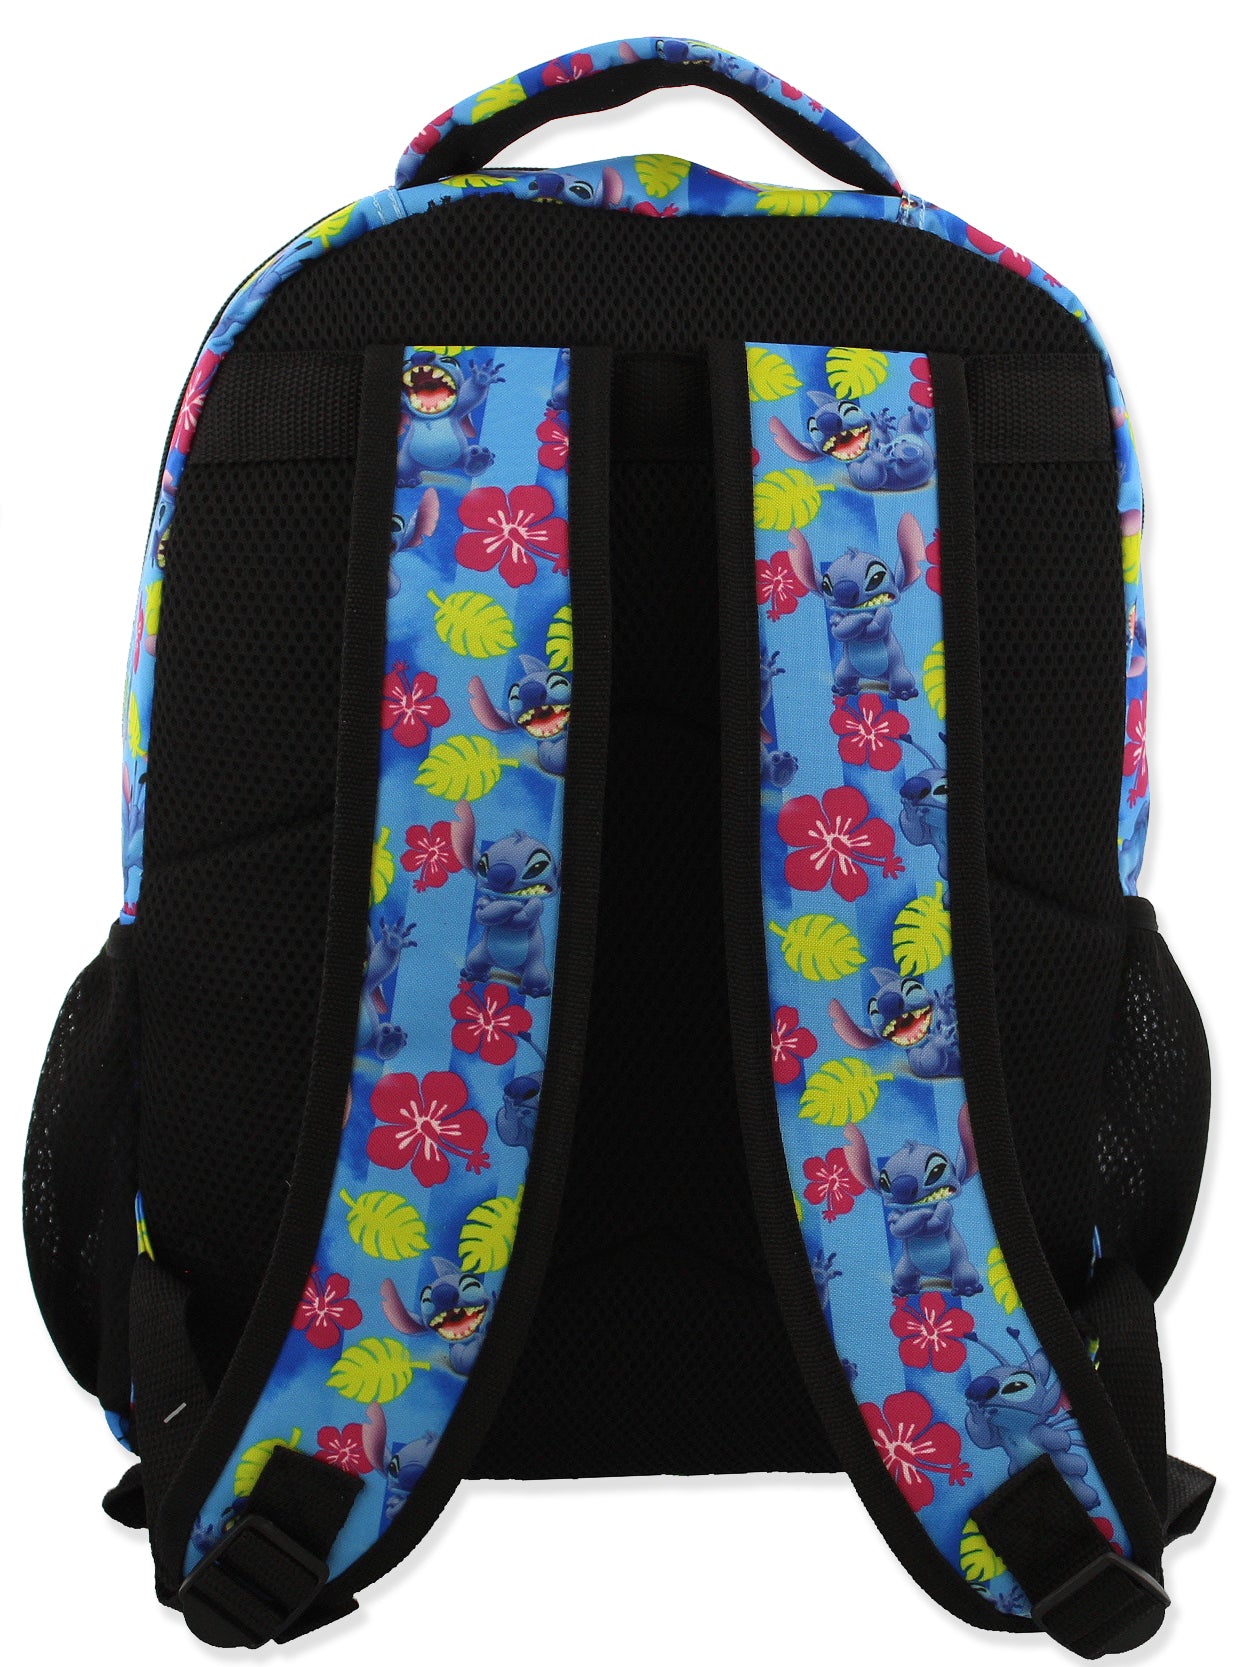 Disney Stitch Transparent Backpack 16 School Bag w/ Insulated Lunch B –  Open and Clothing